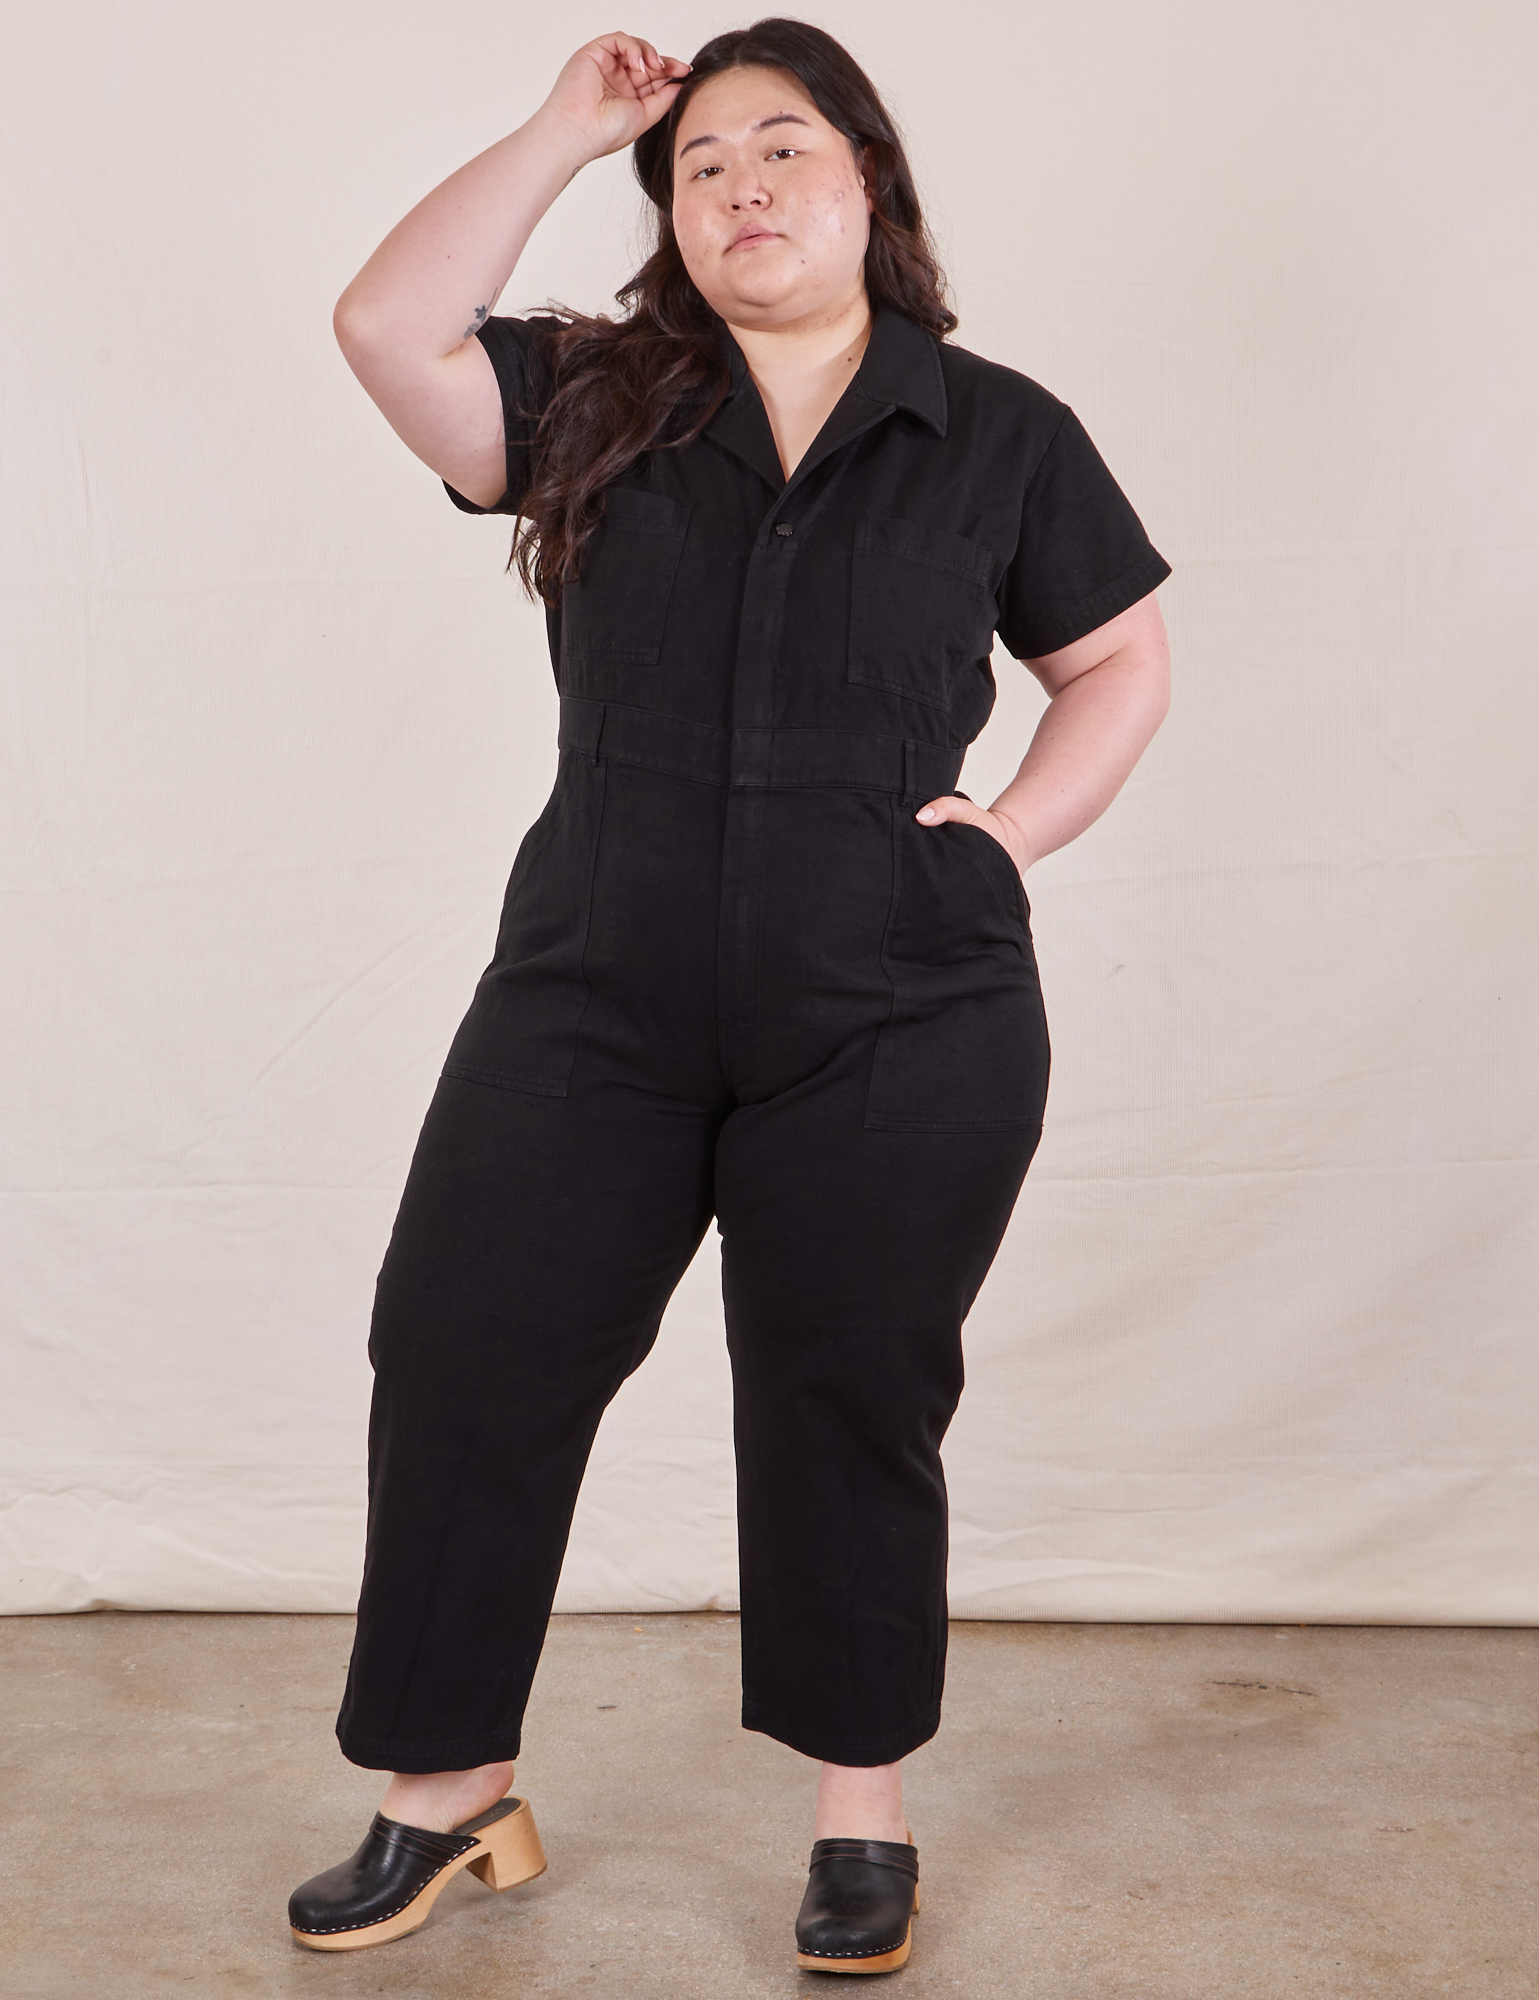 Ashley is 5’7” and wearing 1XL Petite Short Sleeve Jumpsuit in Basic Black.